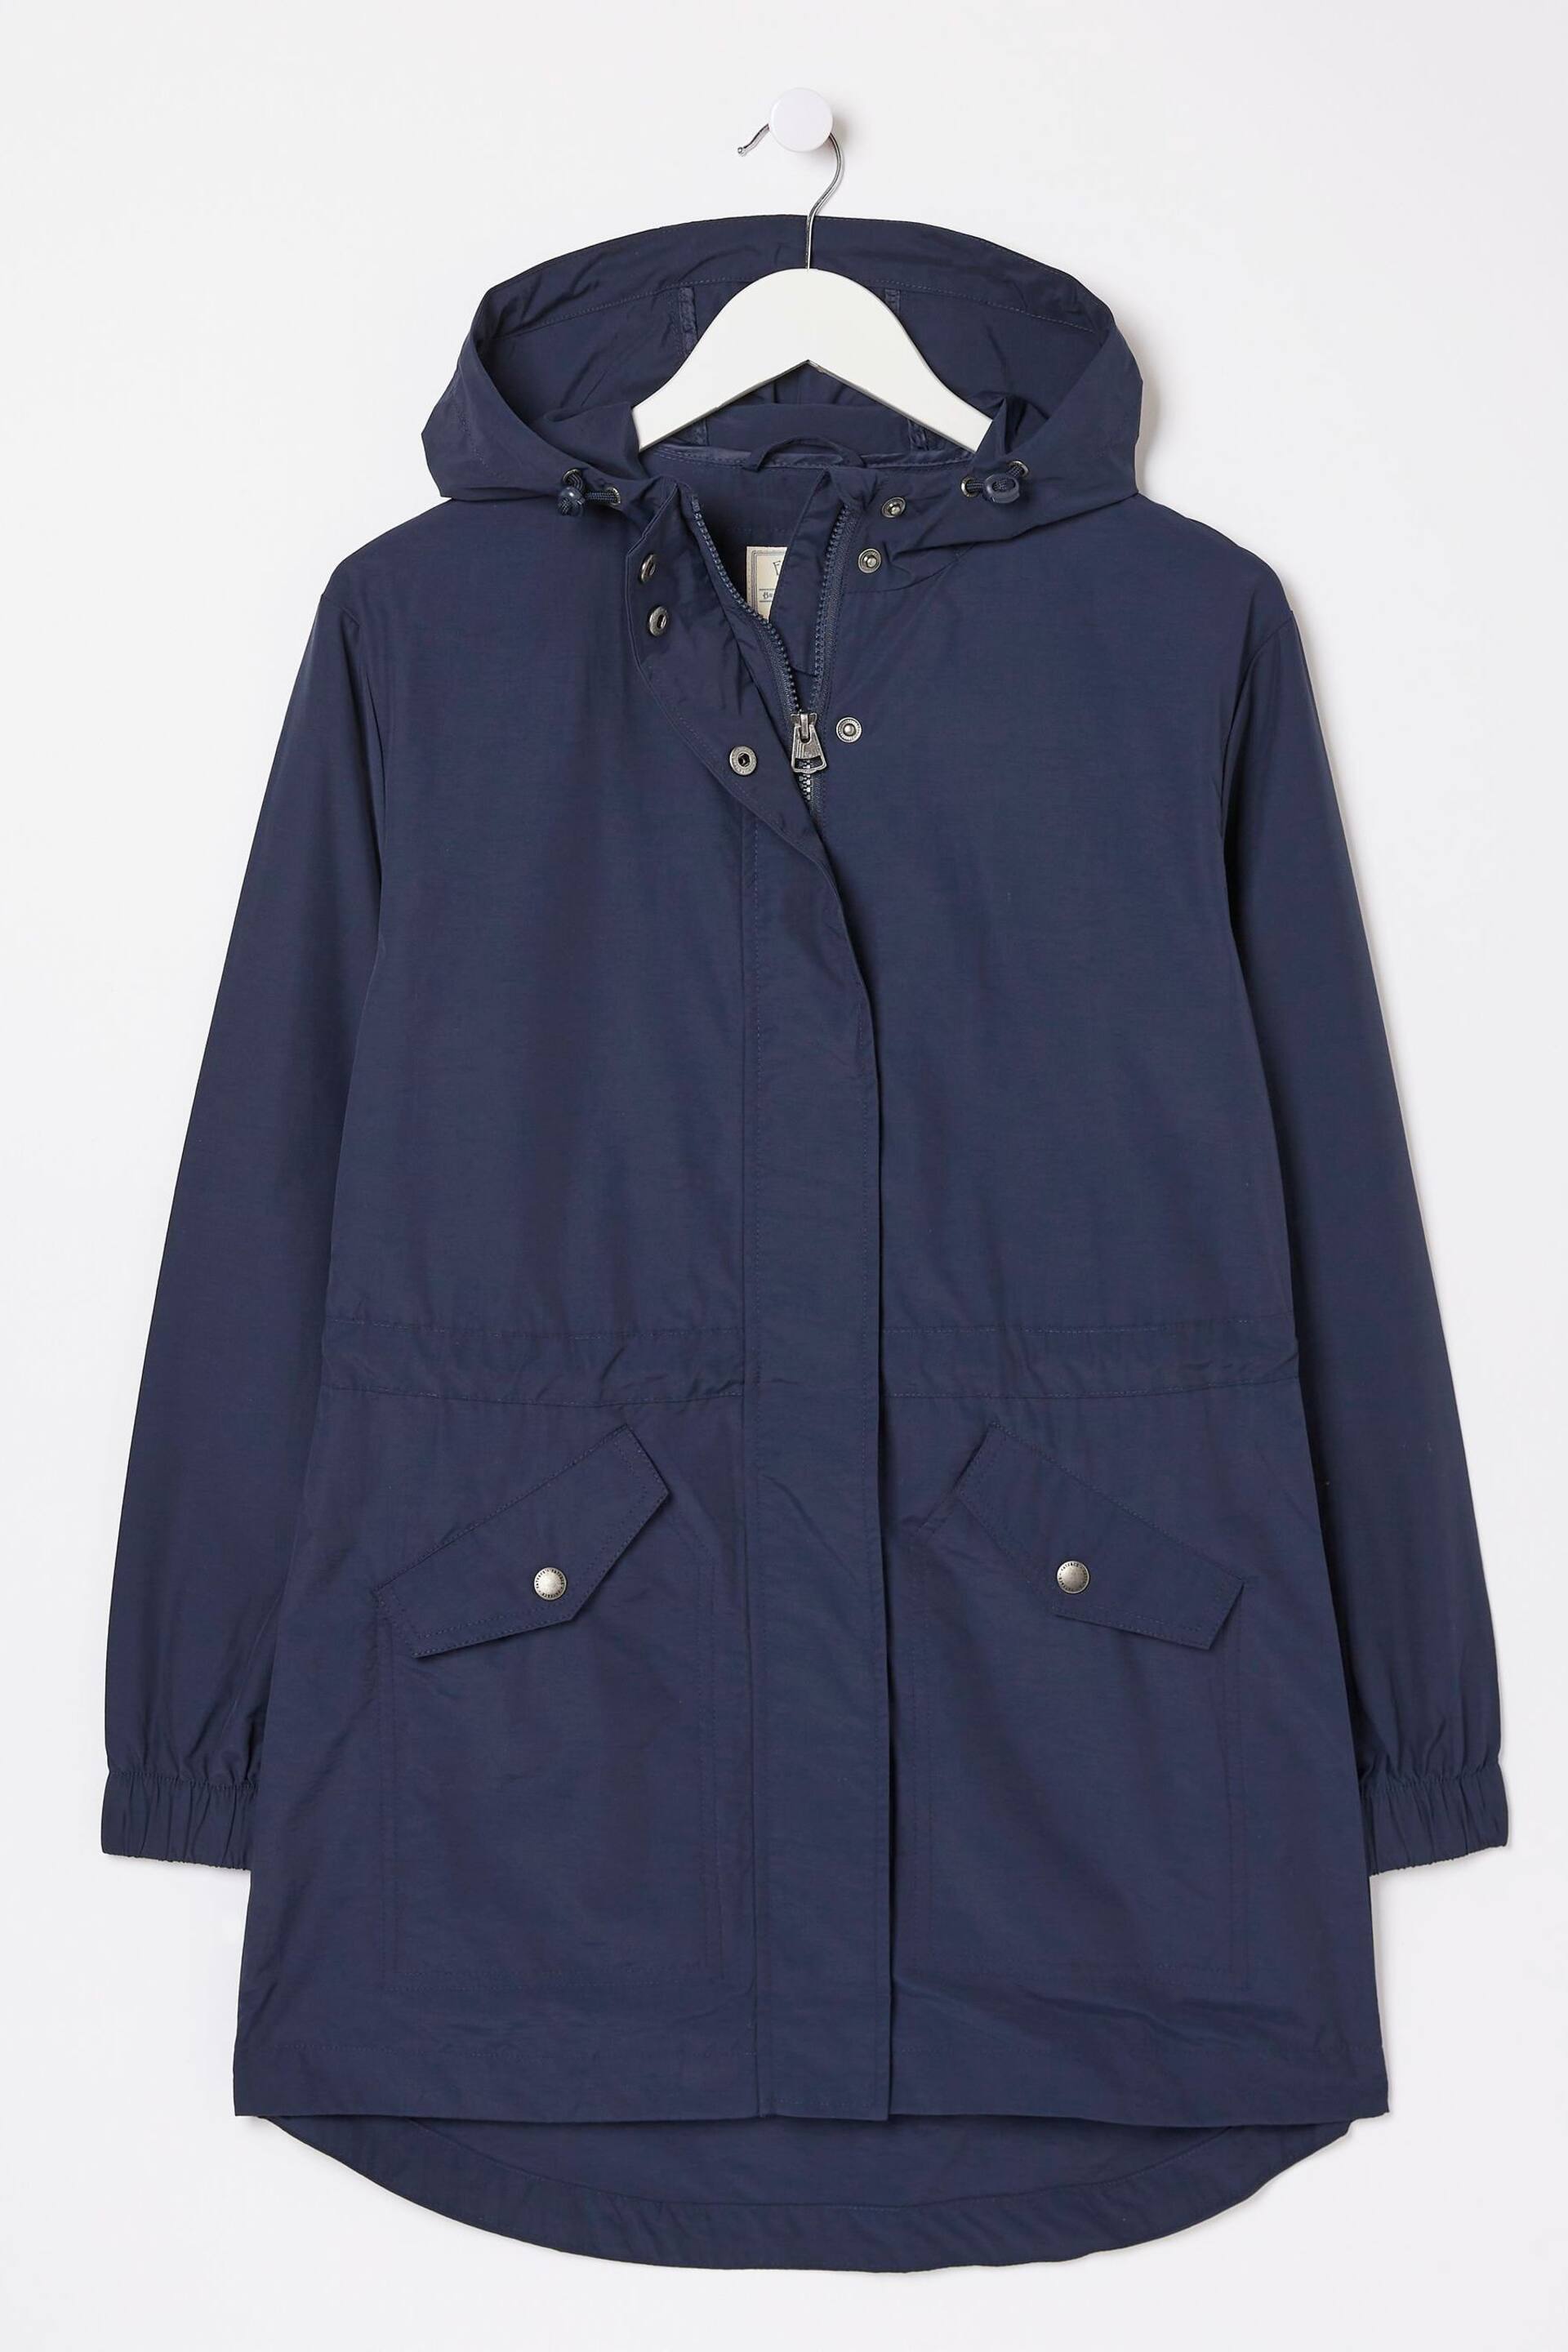 FatFace Blue Lily Lightweight Parka - Image 1 of 1